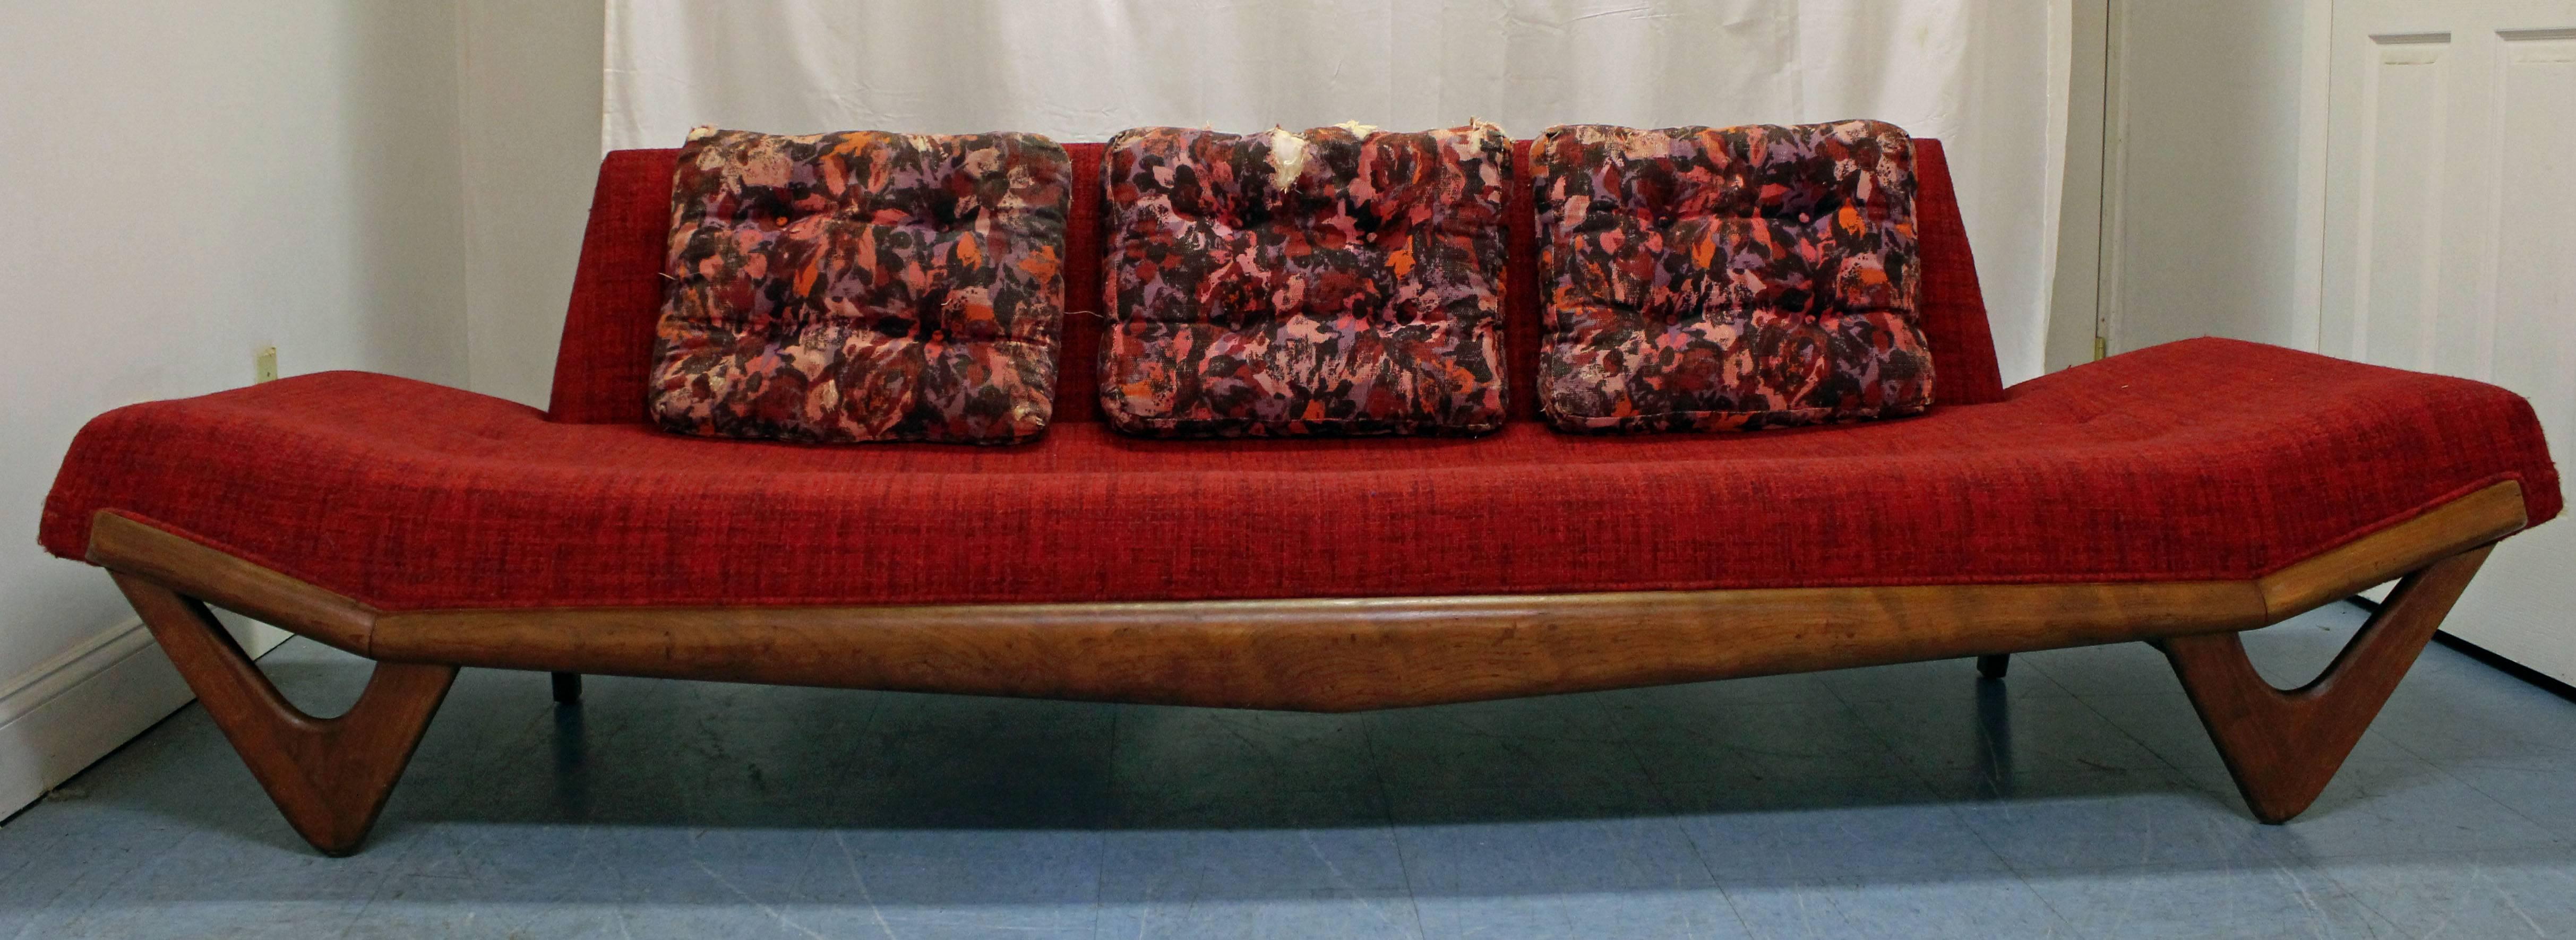 This is an original Pearsall sofa. It features a walnut base with 